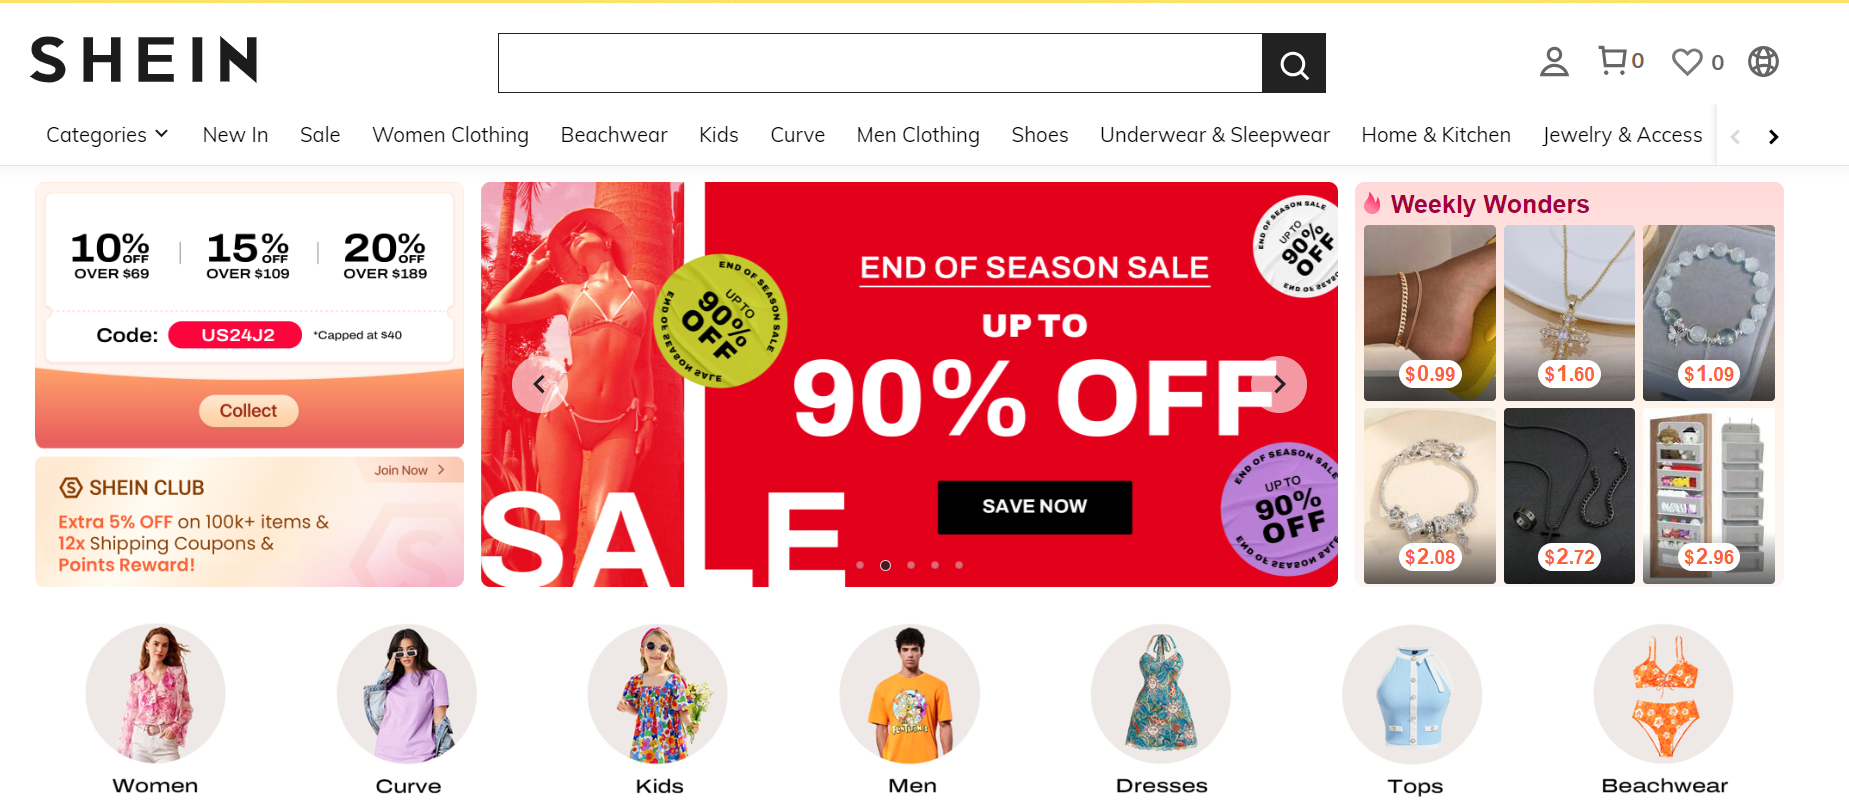 Shein is a major player in the fashion industry and is ideal for those wanting to dropship Malaysia clothing. They offer fast shipping times at low prices.